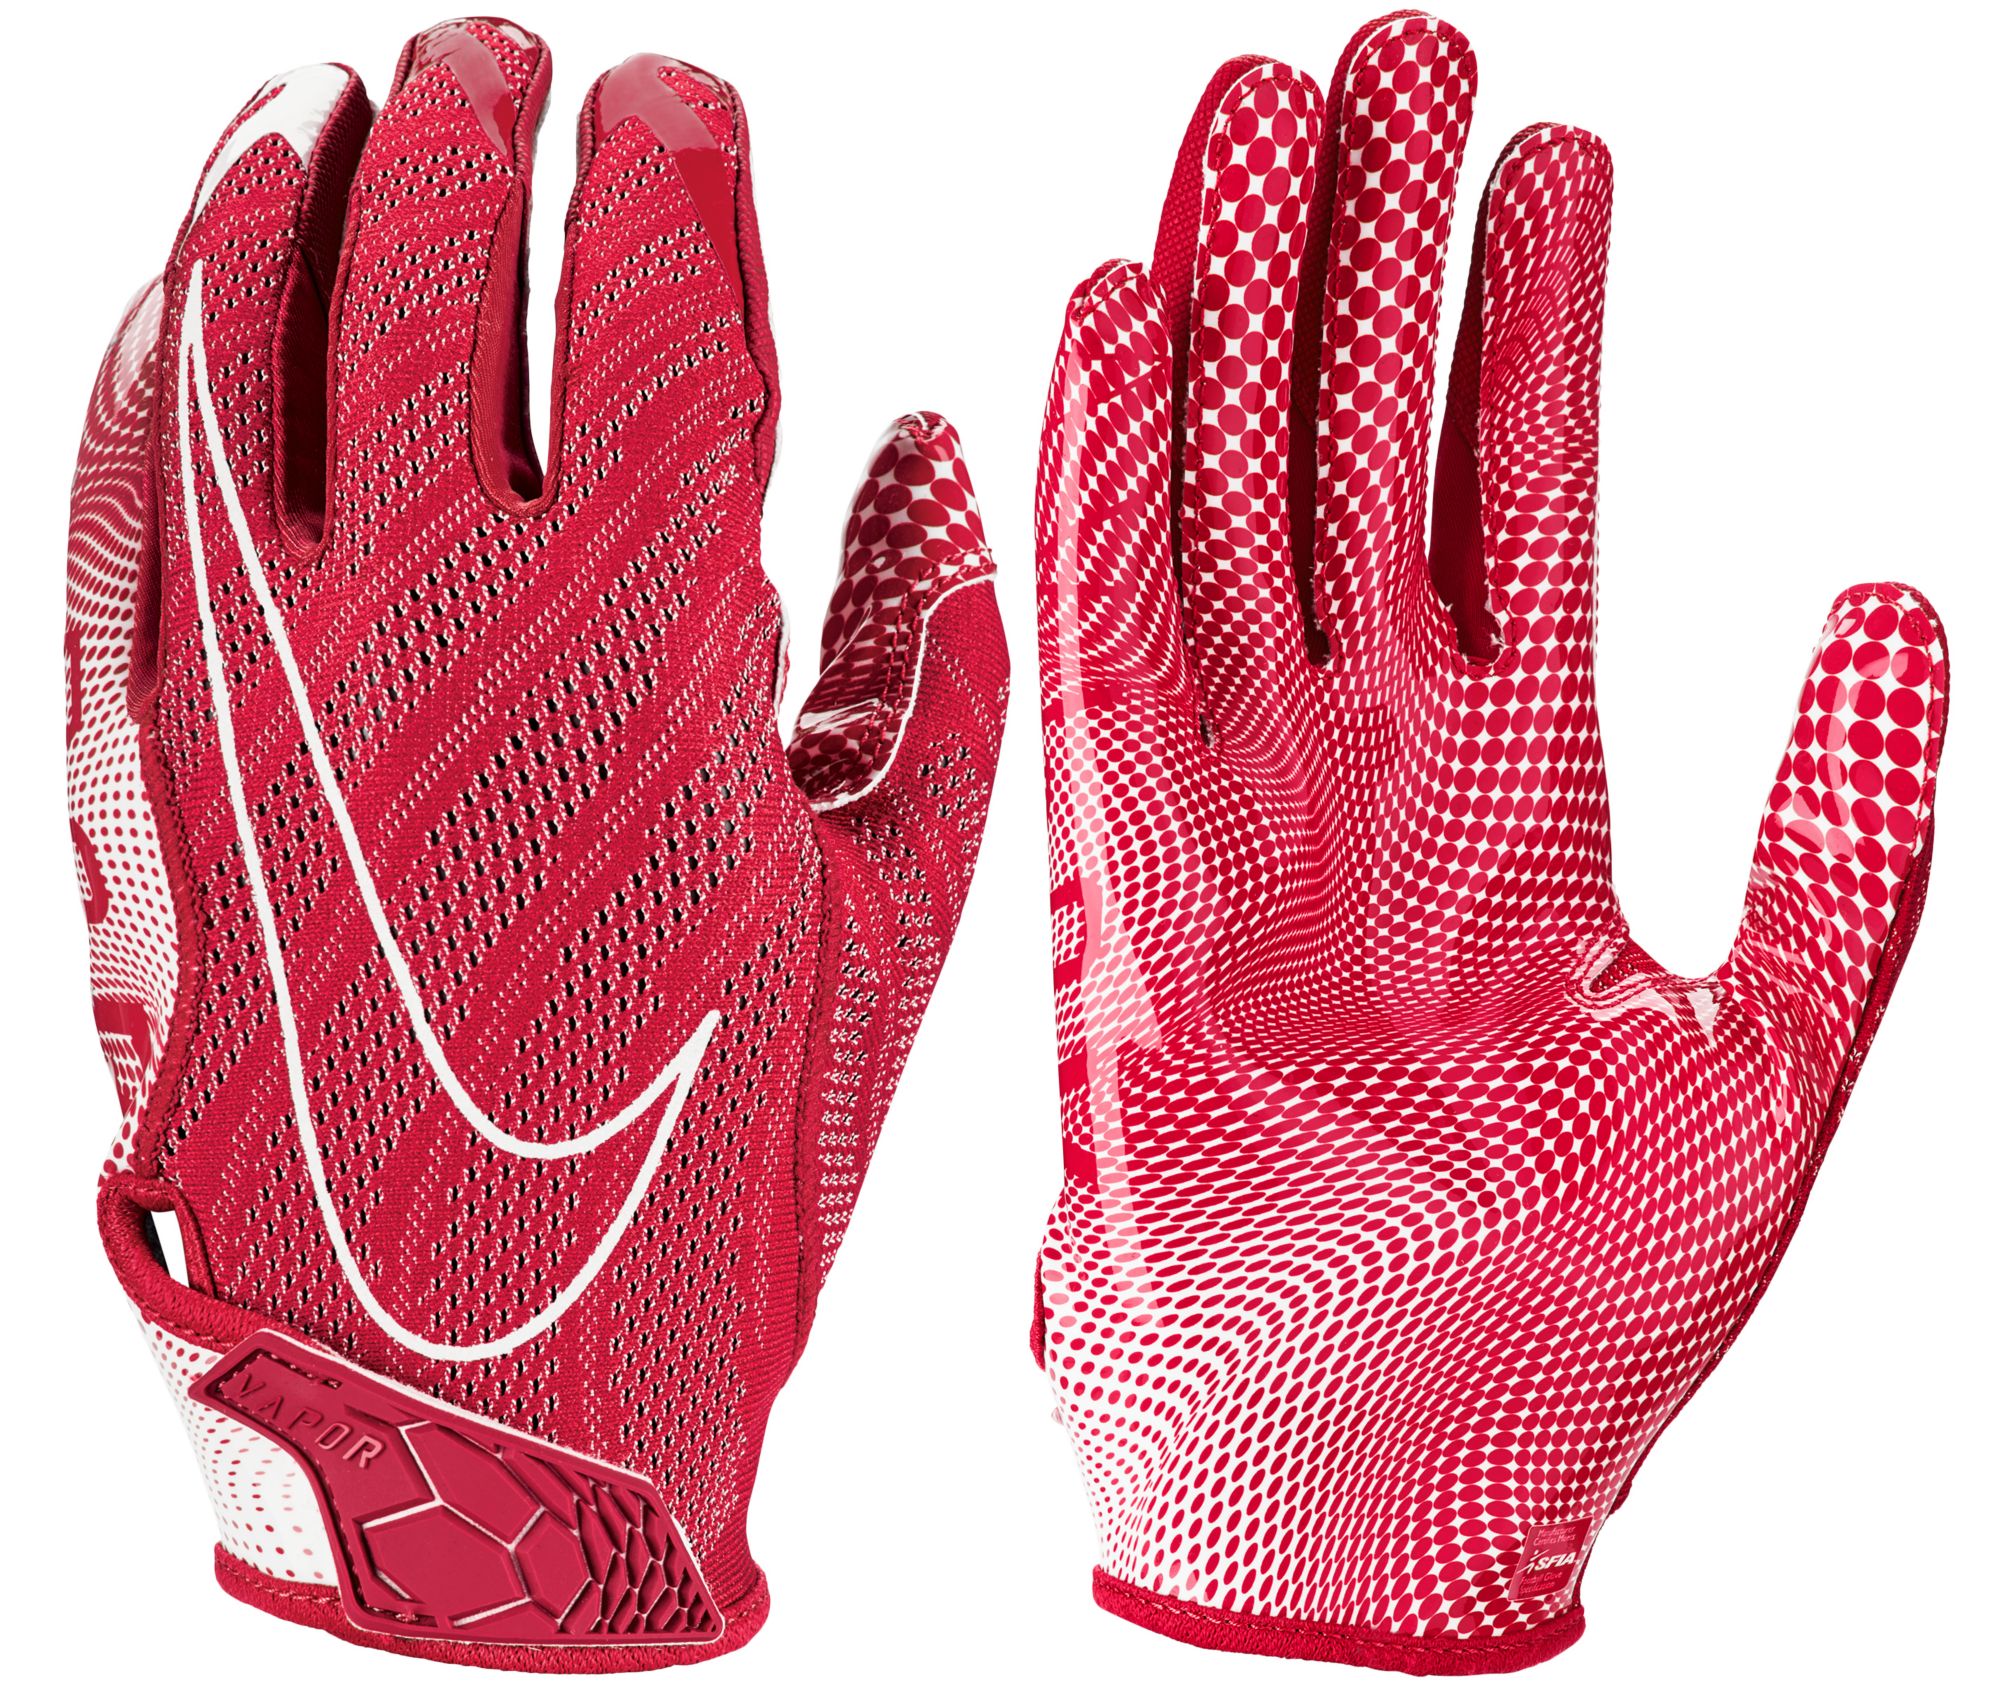 red nike gloves